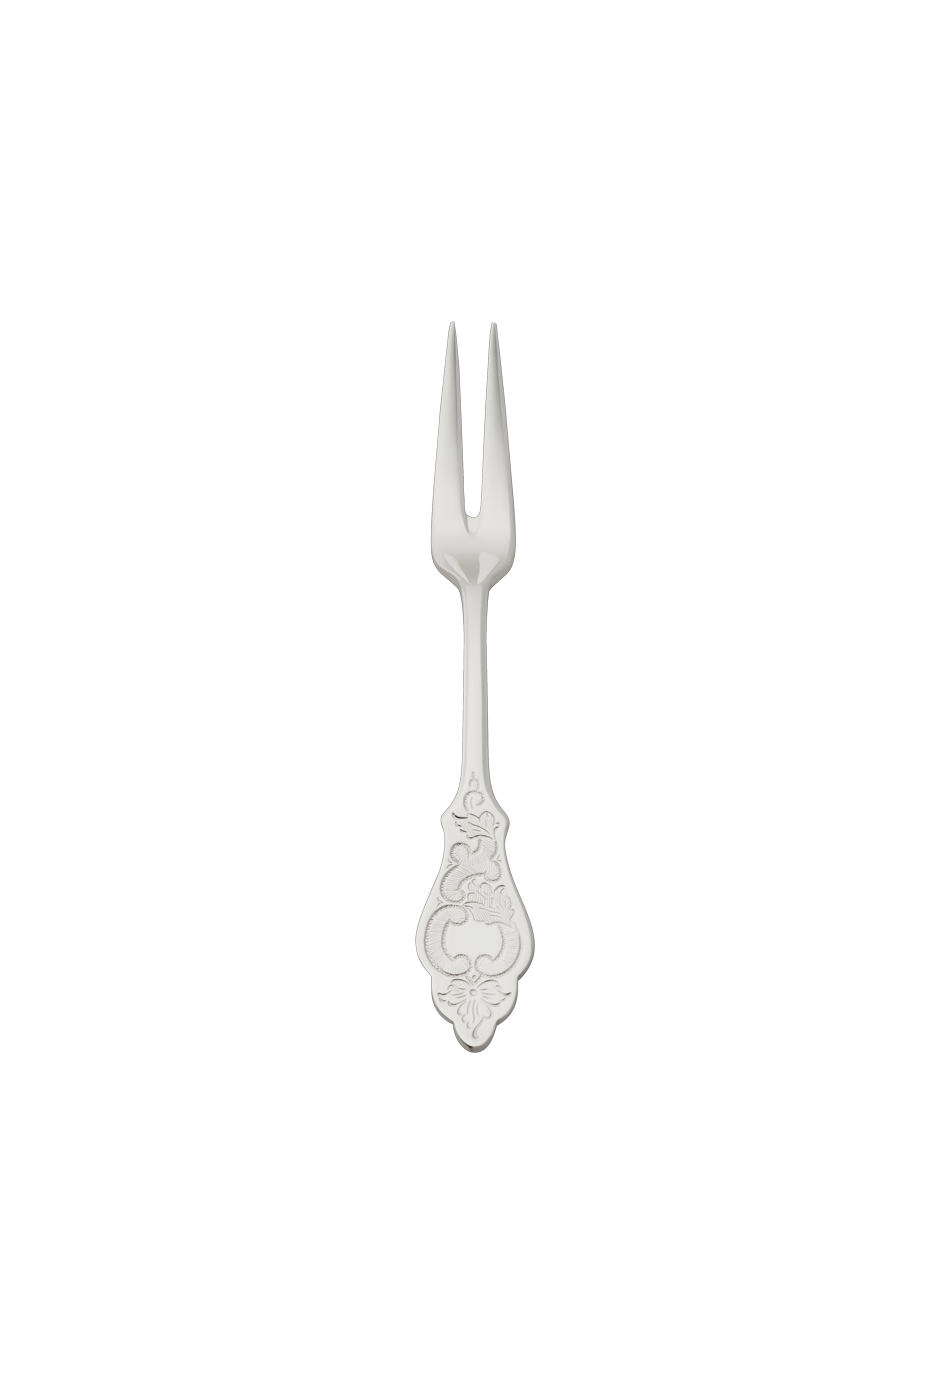 Ostfriesen Meat Fork, large (150g massive silverplated)